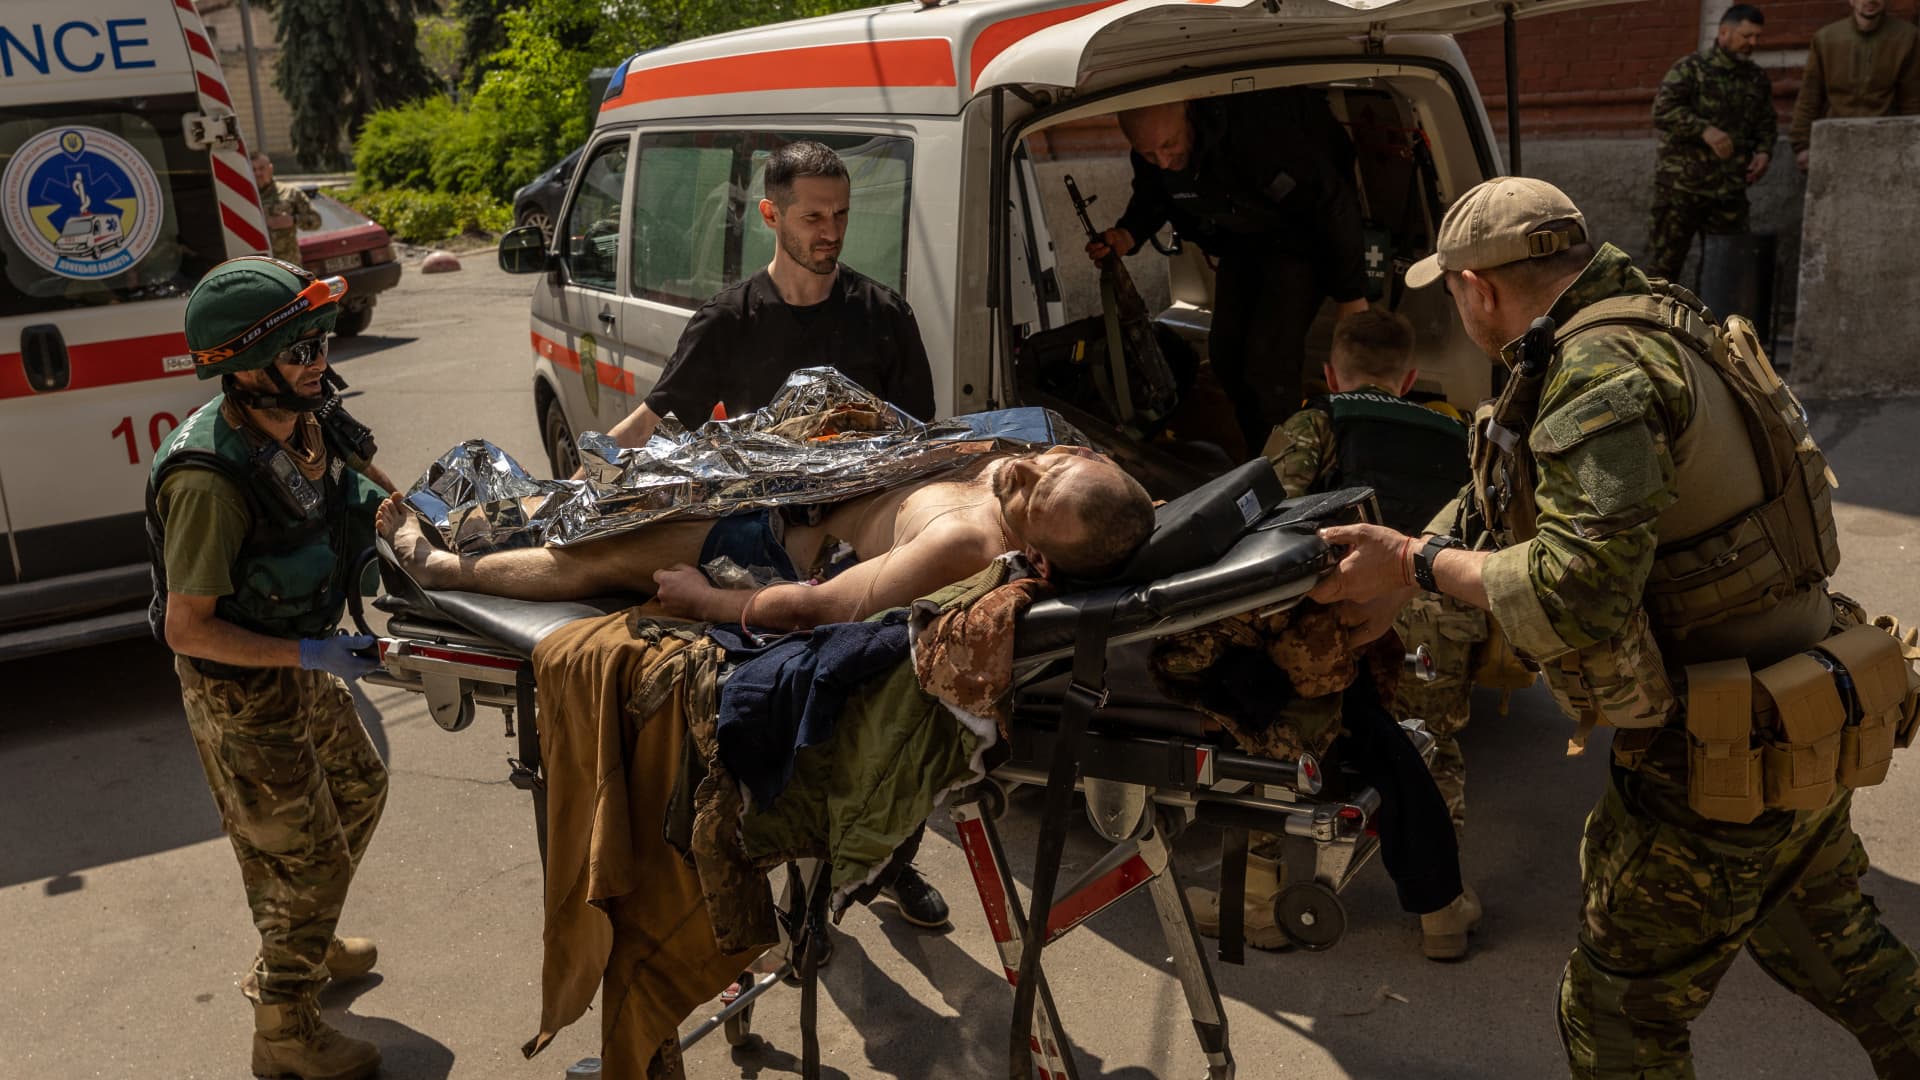 Paramedics from the Pirogov First Volunteer Mobile Hospital move an injured Ukrainian solider, who was evacuated from the front line in Popasna, from an ambulance, amid Russia's invasion in Ukraine, outside a hospital in Bakhmut, Donetsk region, Ukraine, May 5, 2022. 